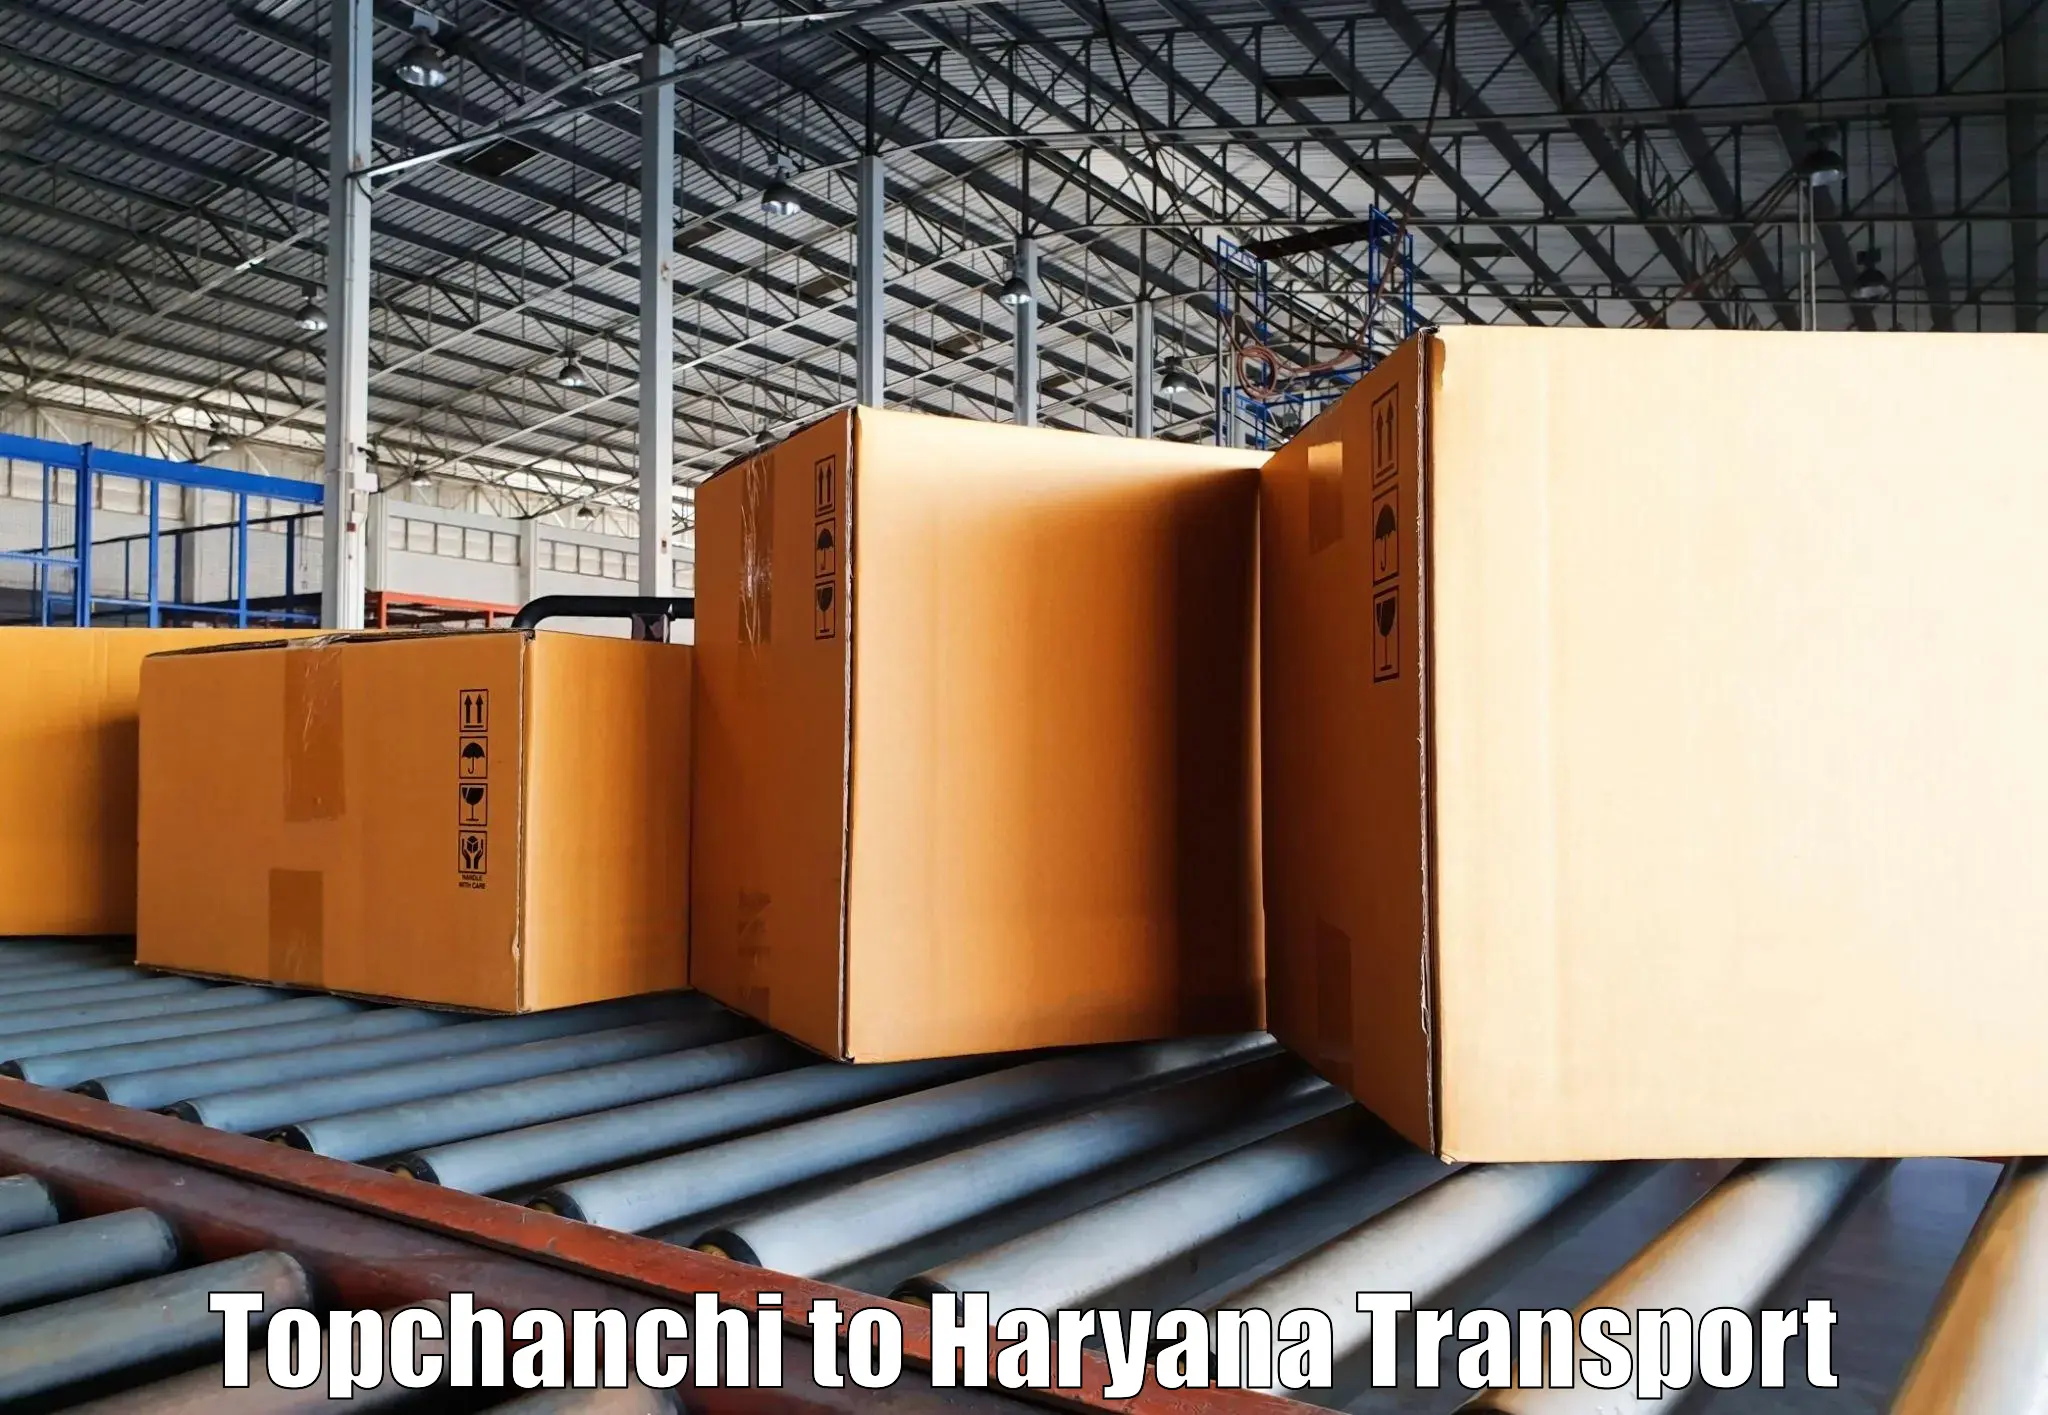 Best transport services in India Topchanchi to Panchkula